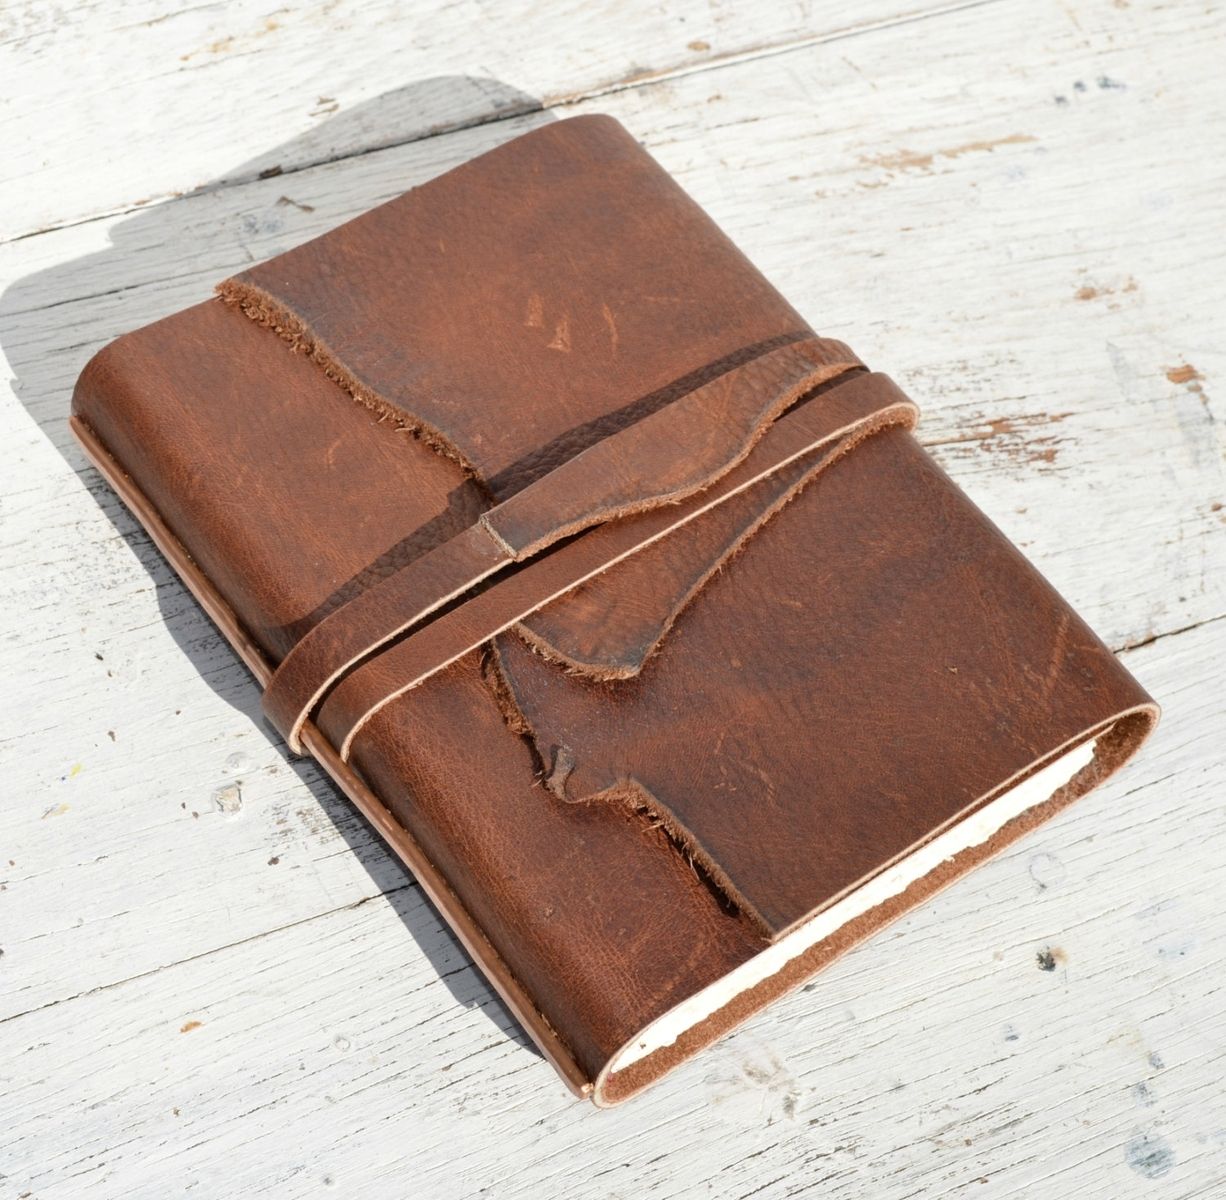 Hand Crafted Handmade Leather Bound Cowboy Journal Western Travel Diary